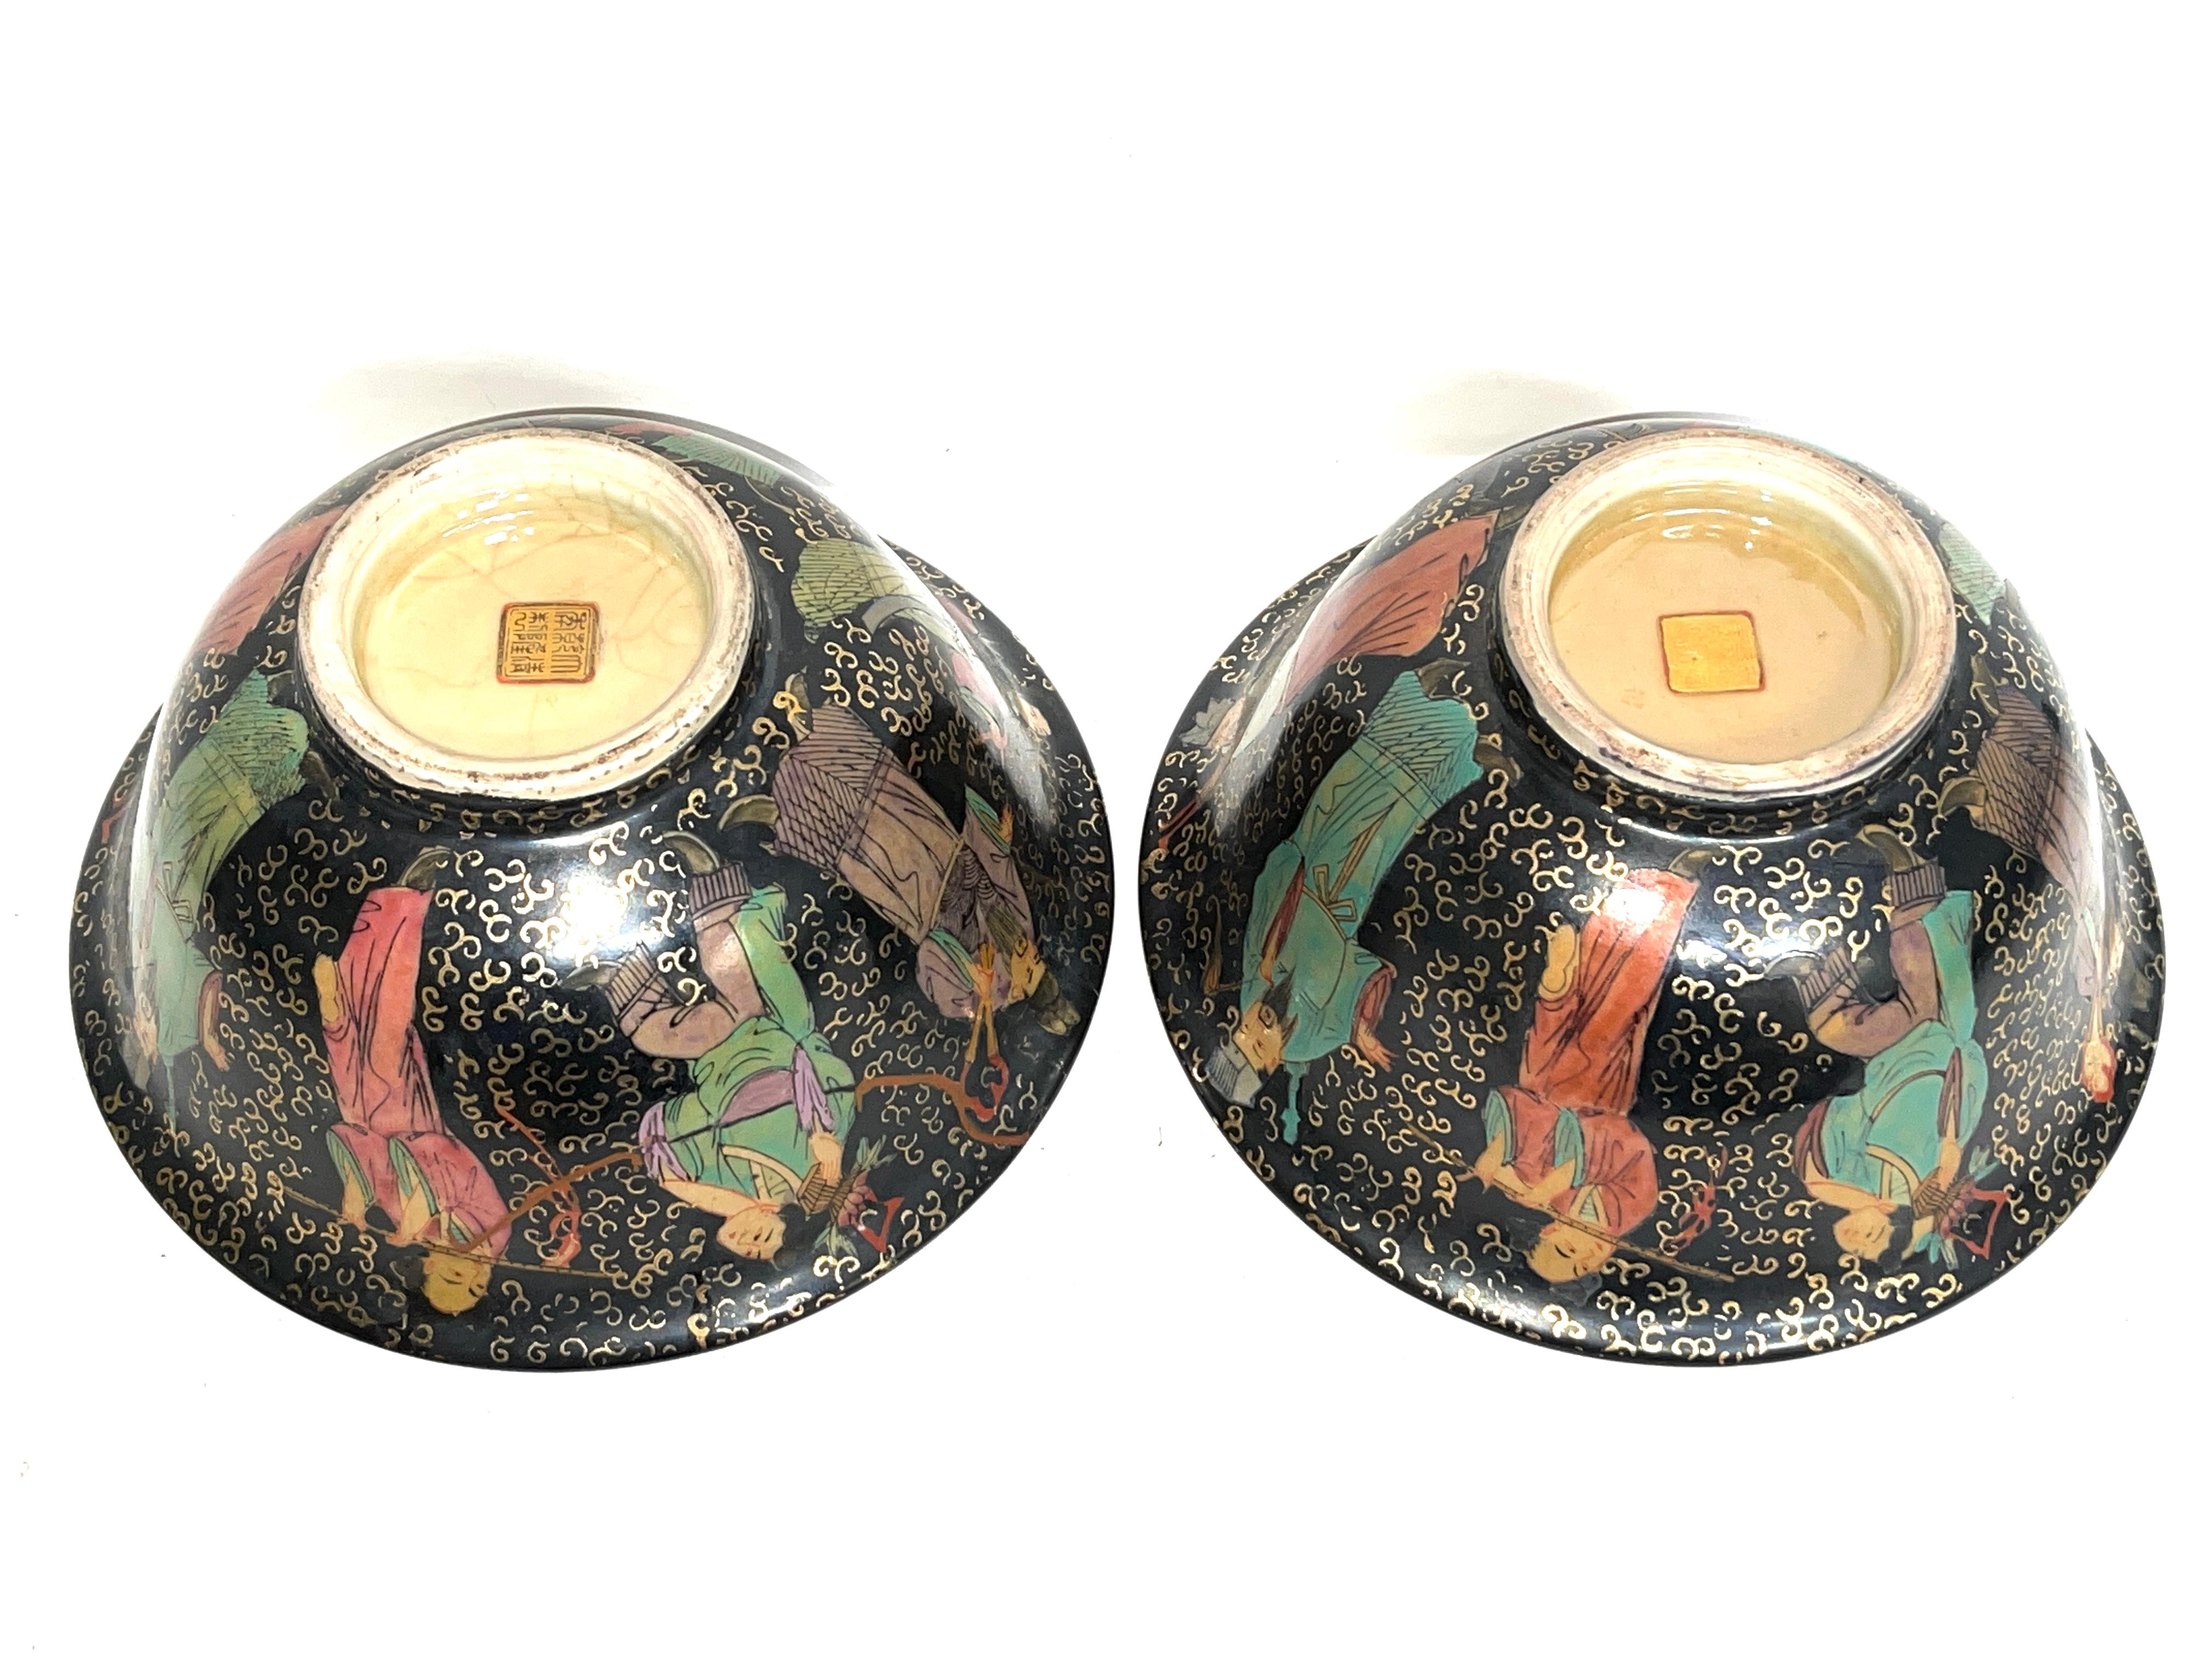 Pair of Antique Chinese Ceramic Bowls, 20th Century, Asian Art For Sale 3